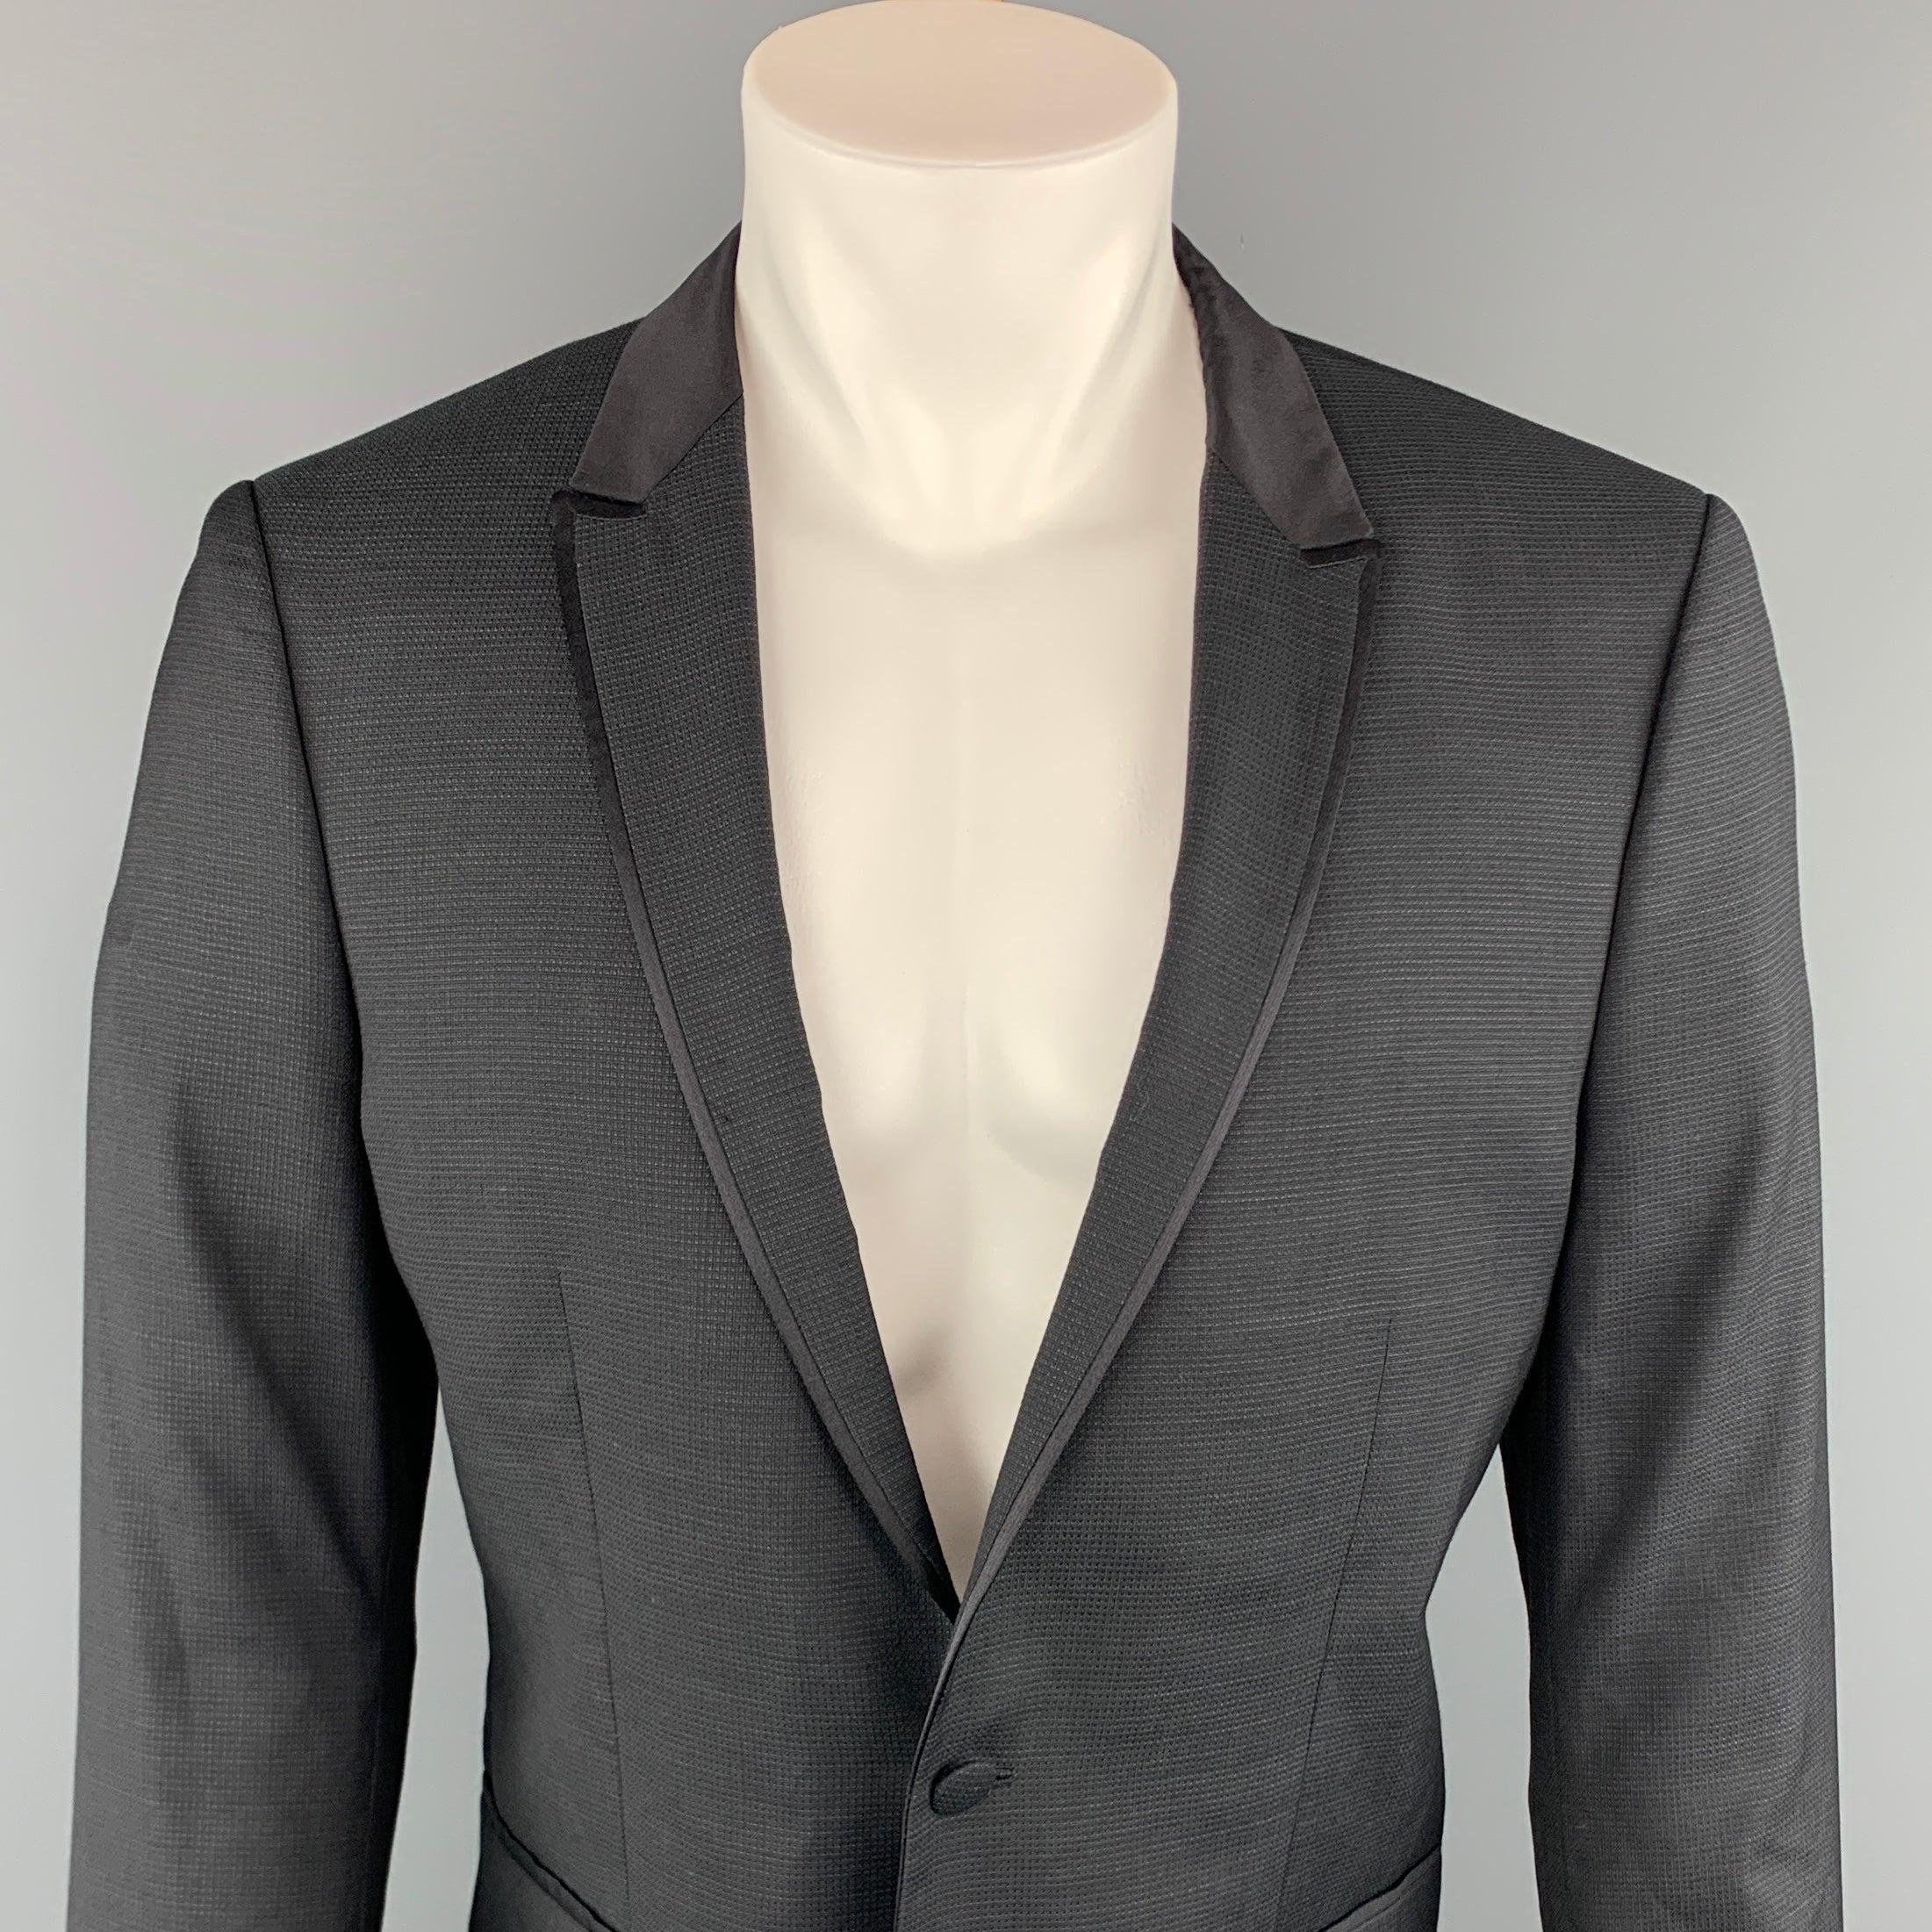 THE KOOPLES sport coat comes in a black nailhead wool with a peak lapel and a single button closure.
Excellent Pre-Owned Condition.
 

Marked:   52 

Measurements: 
 
Shoulder: 17 inches 
Chest: 40 inches 
Sleeve: 26.5 inches 
Length: 27.5 inches 
 